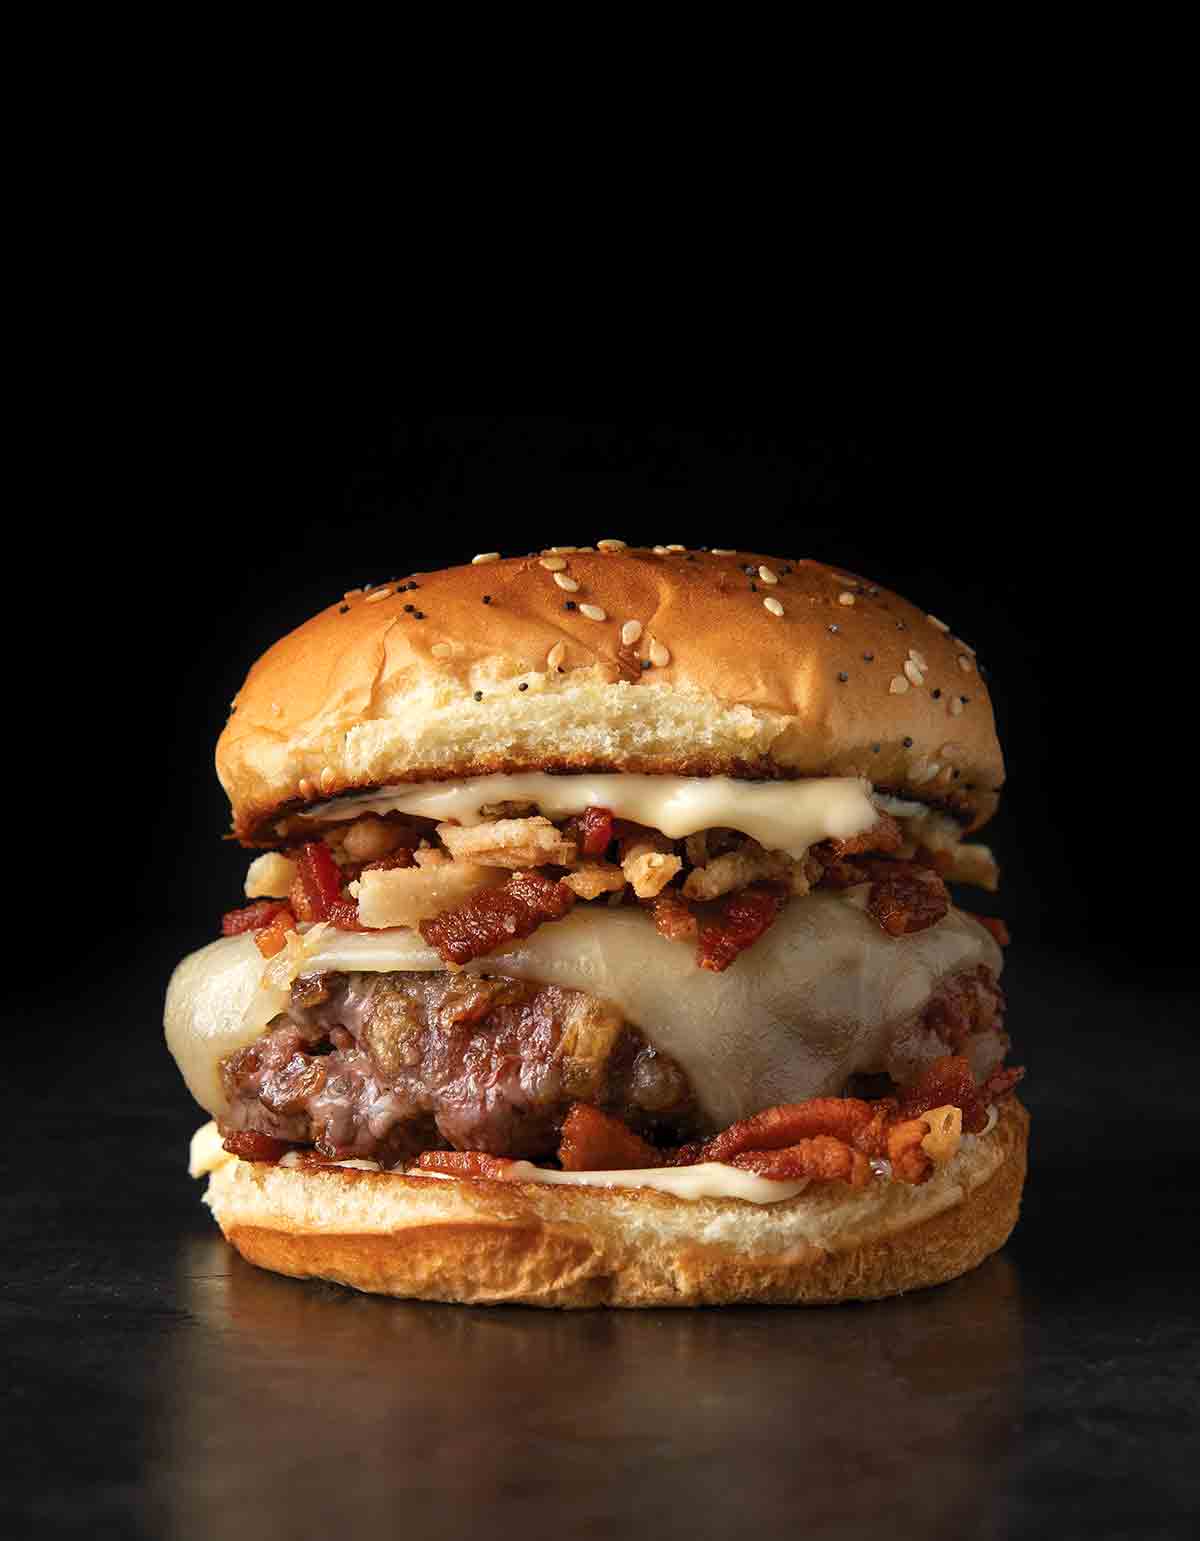 A cheeseburger topped with bacon and crispy onions on a sesame seed bun.